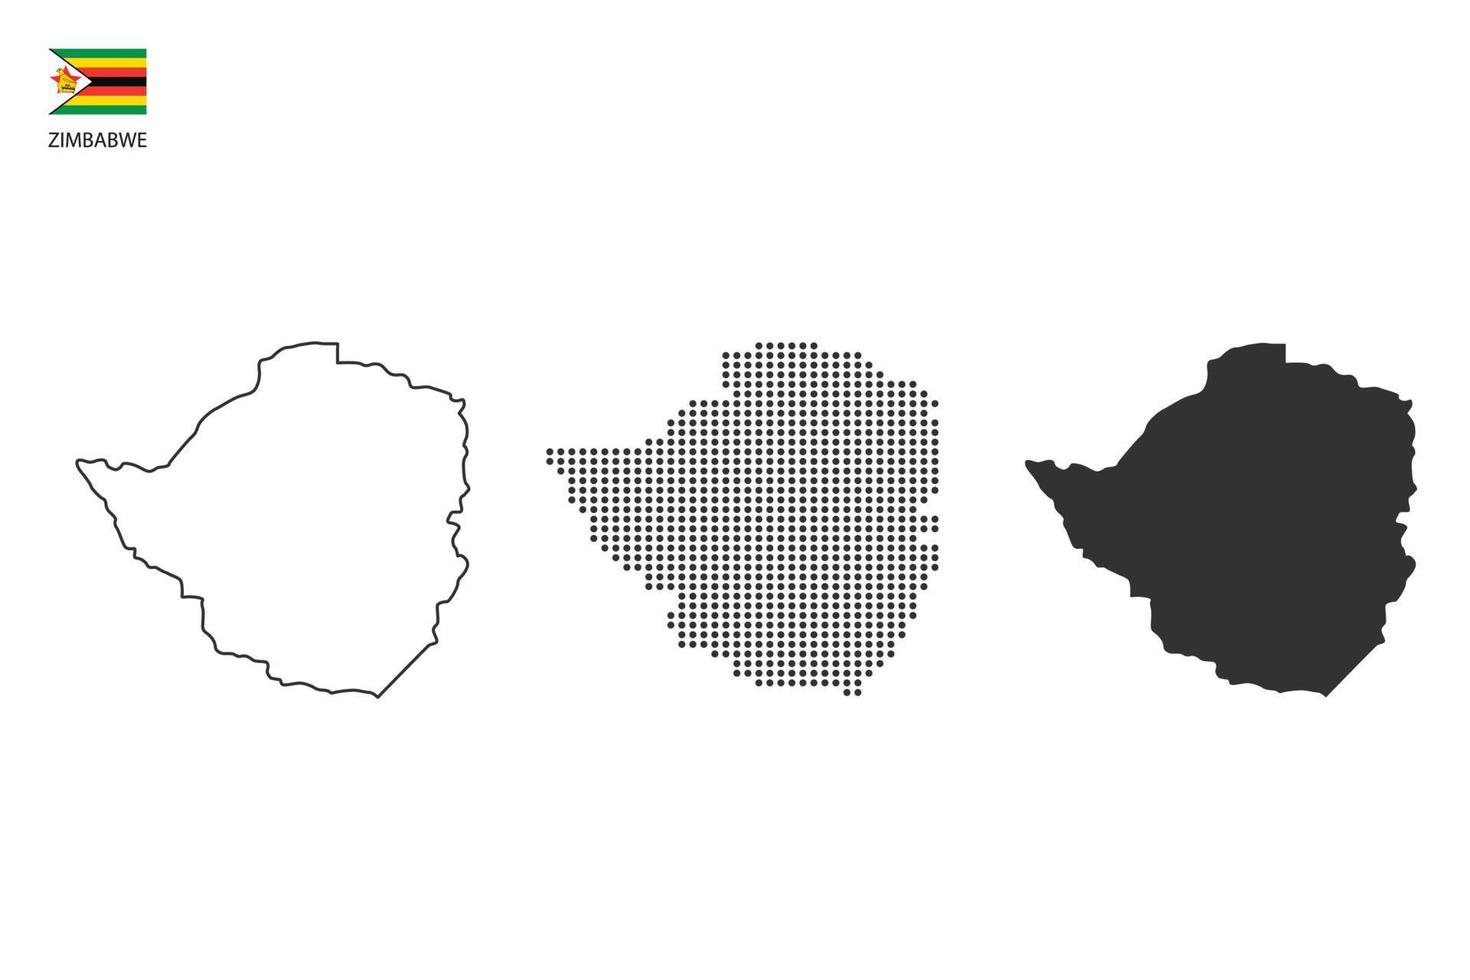 3 versions of Zimbabwe map city vector by thin black outline simplicity style, Black dot style and Dark shadow style. All in the white background.